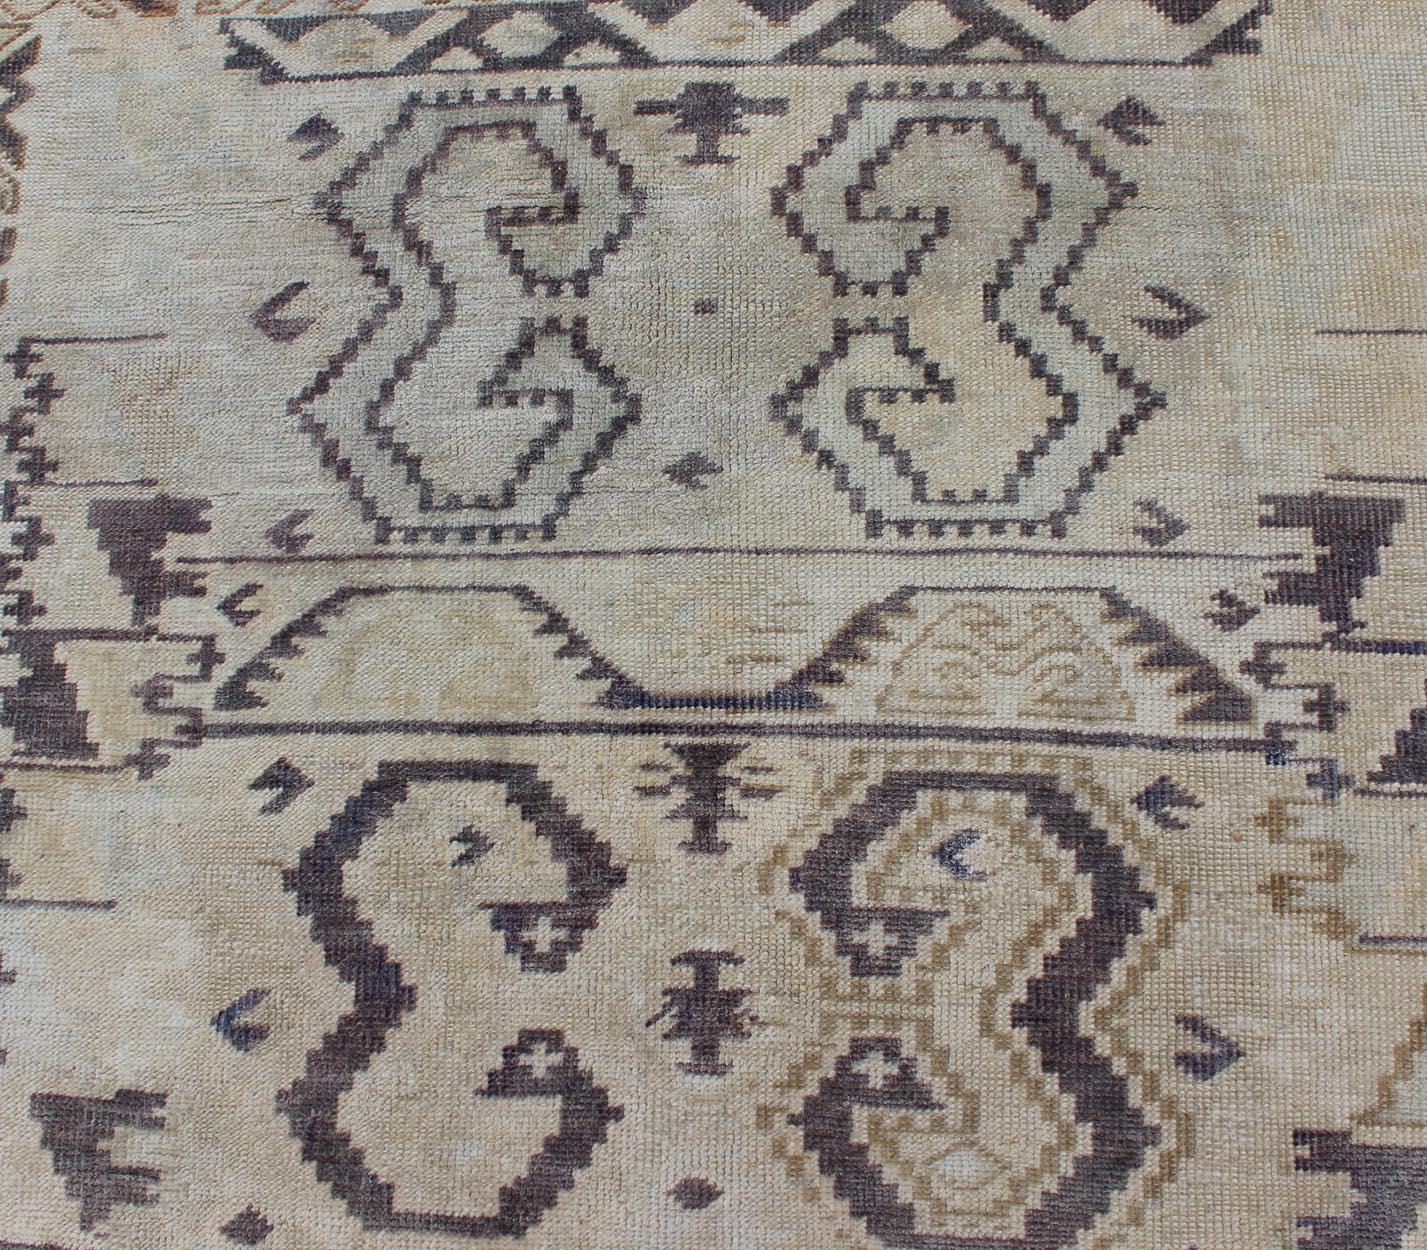 Wool Uniquely Designed Oushak Rug in Taupe and Purple-Gray